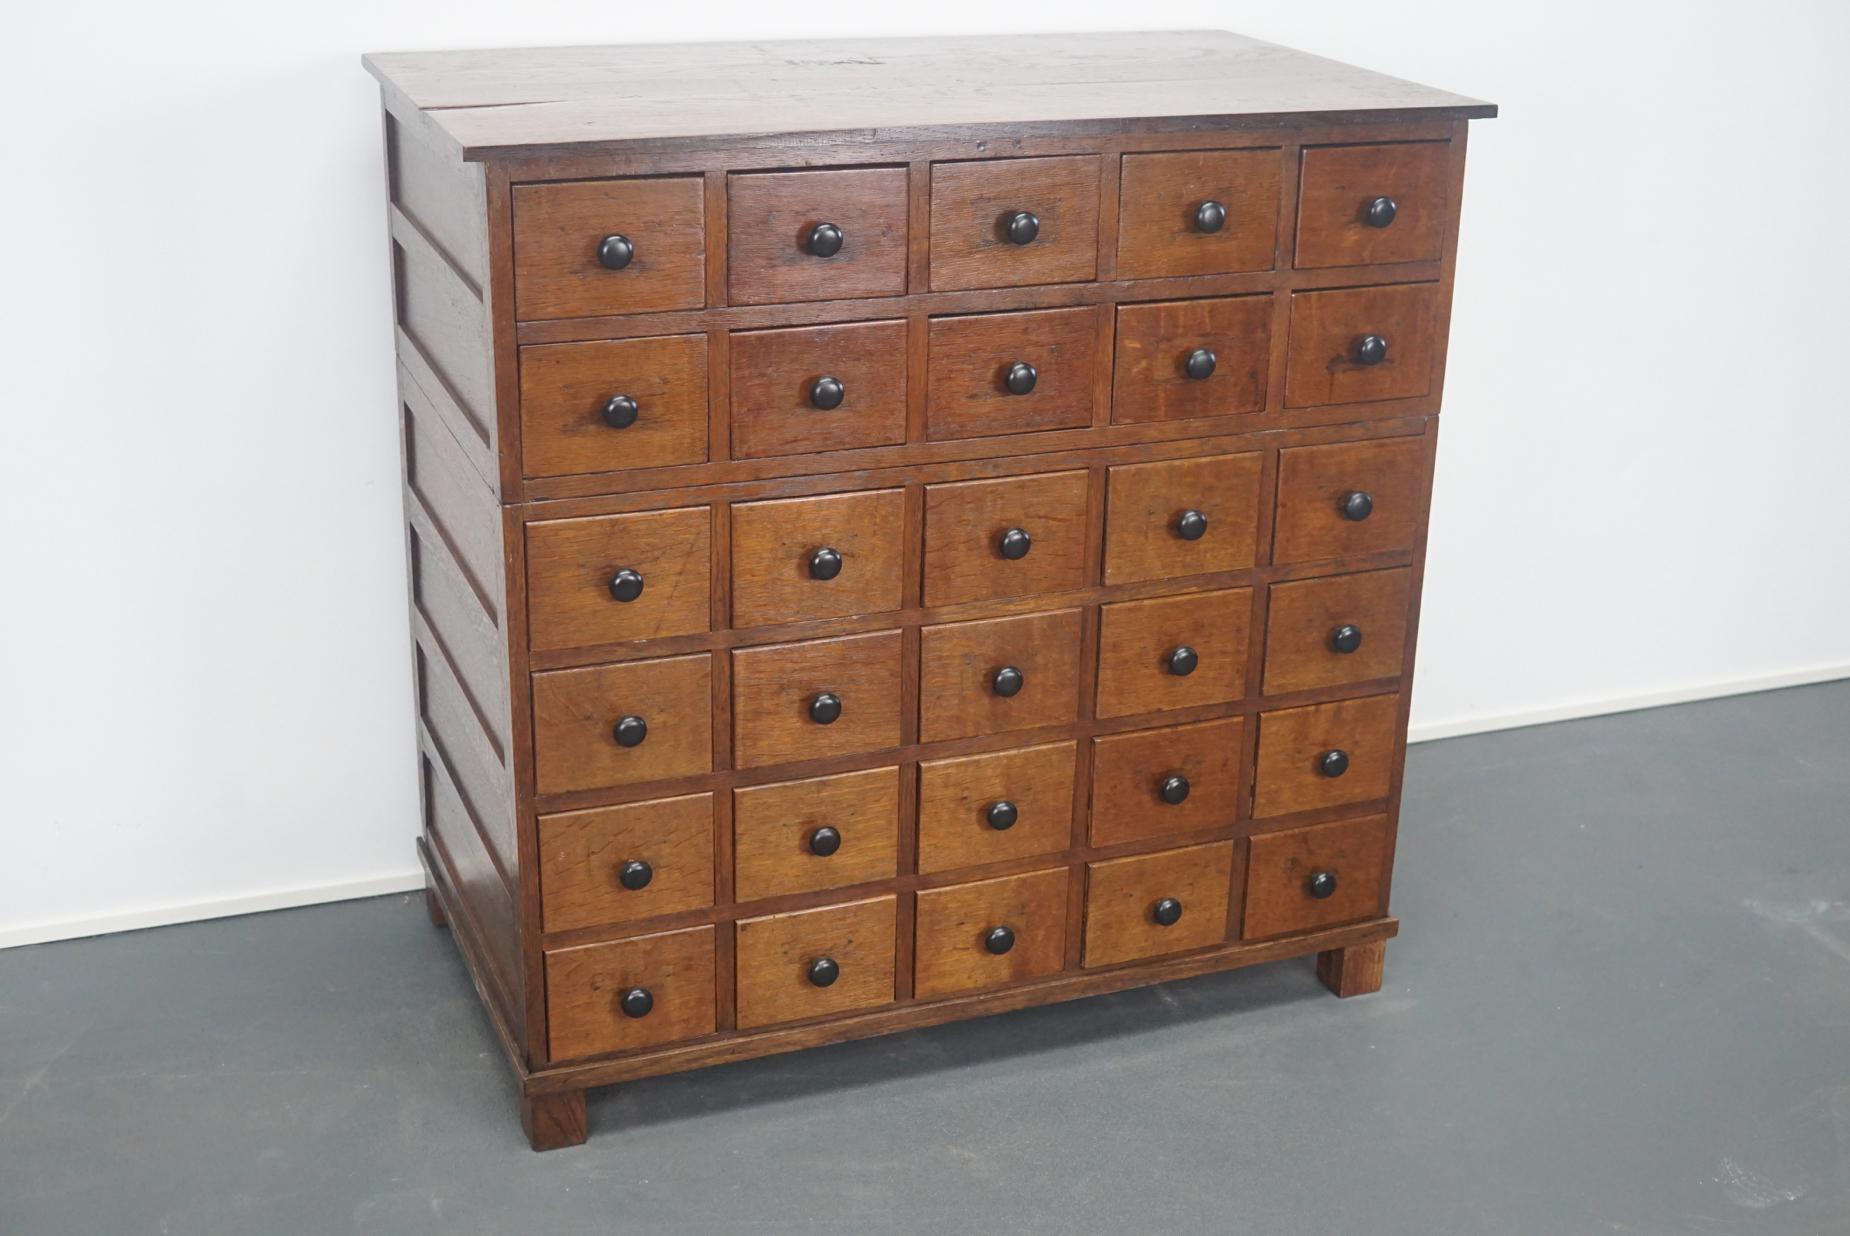 This apothecary cabinet of drawers was designed, circa 1930s in France. The piece is made from oak and features 30 drawers with metal handles round knobs.
 